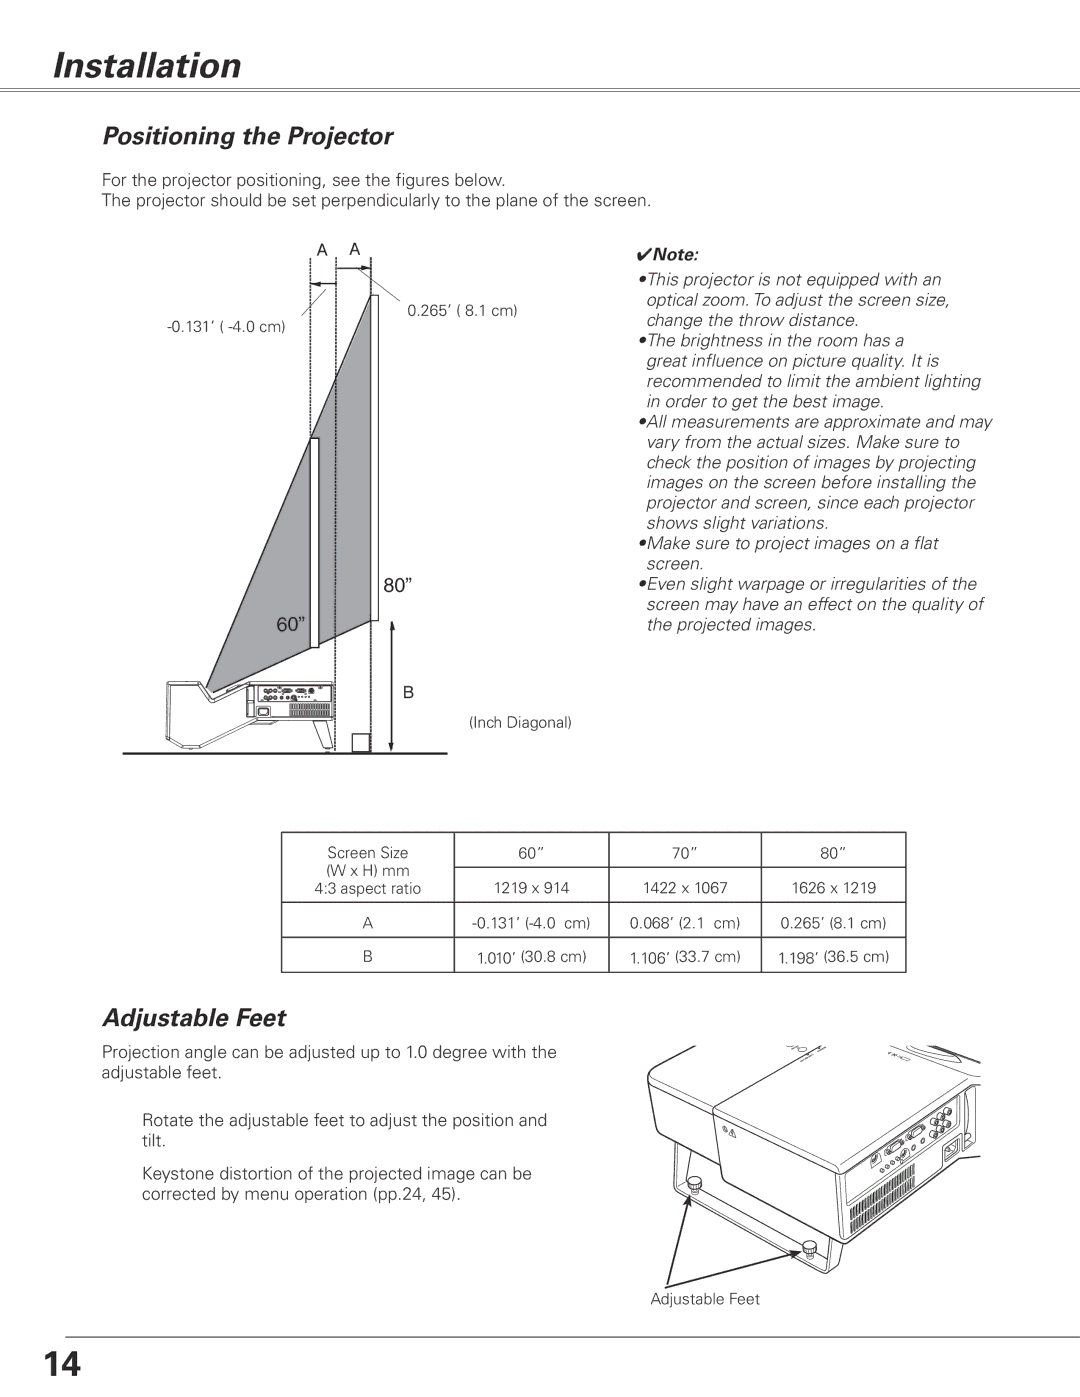 Sanyo PLC-XL50 owner manual Installation, Positioning the Projector, Adjustable Feet 